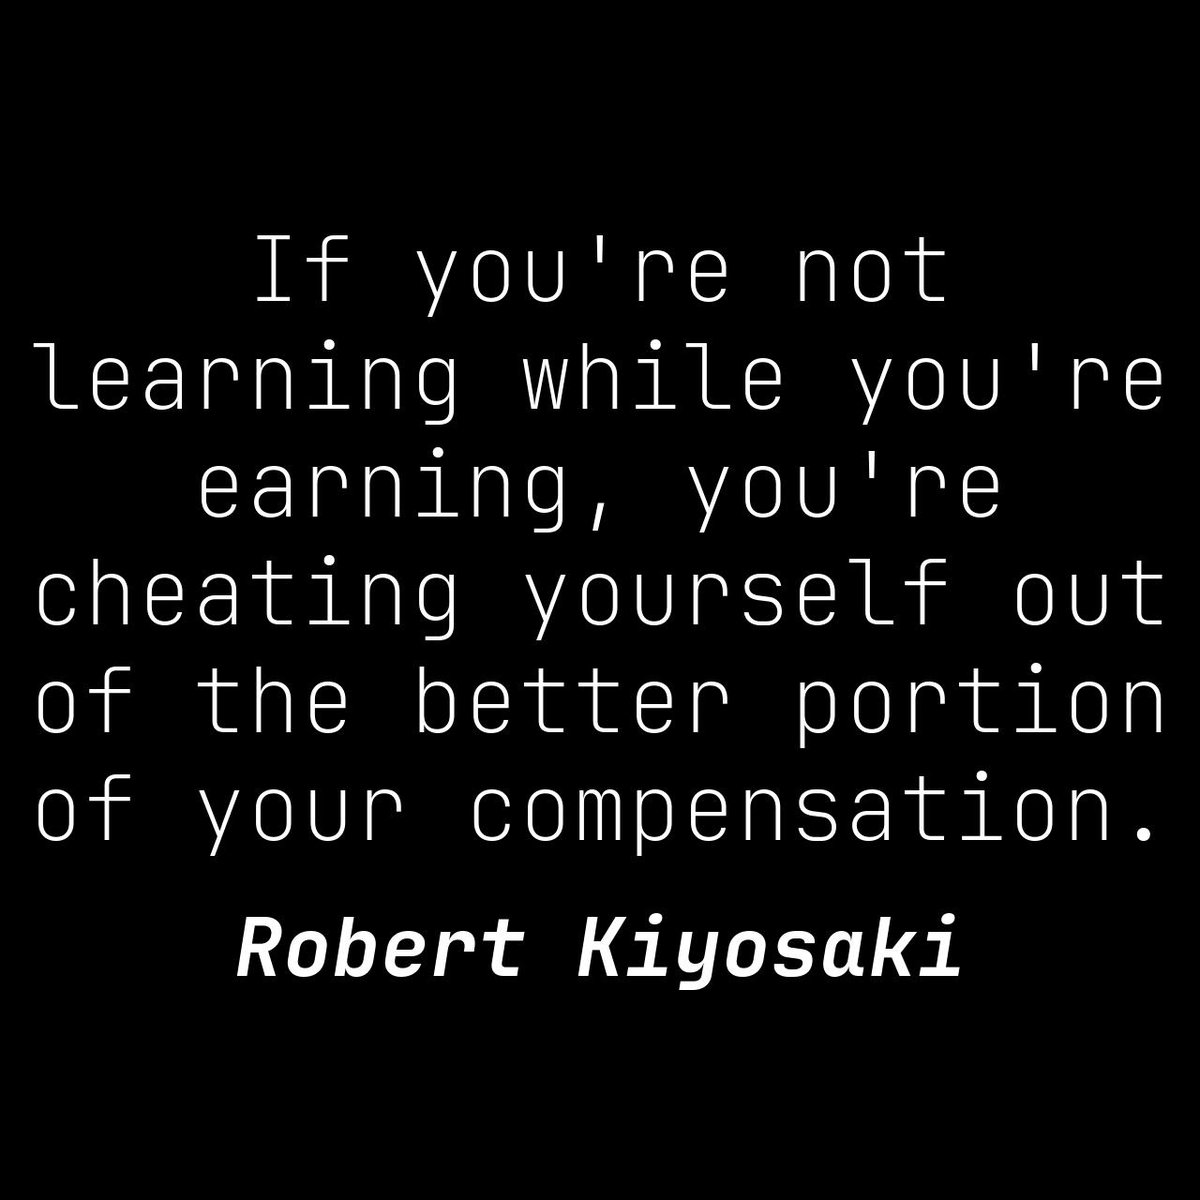 If you want to maximize your compensation, never stop learning! 📚💰 Invest in yourself and continuously grow. #LearningWhileEarning #NeverStopGrowing #MaximizeCompensation #ContinuousLearning